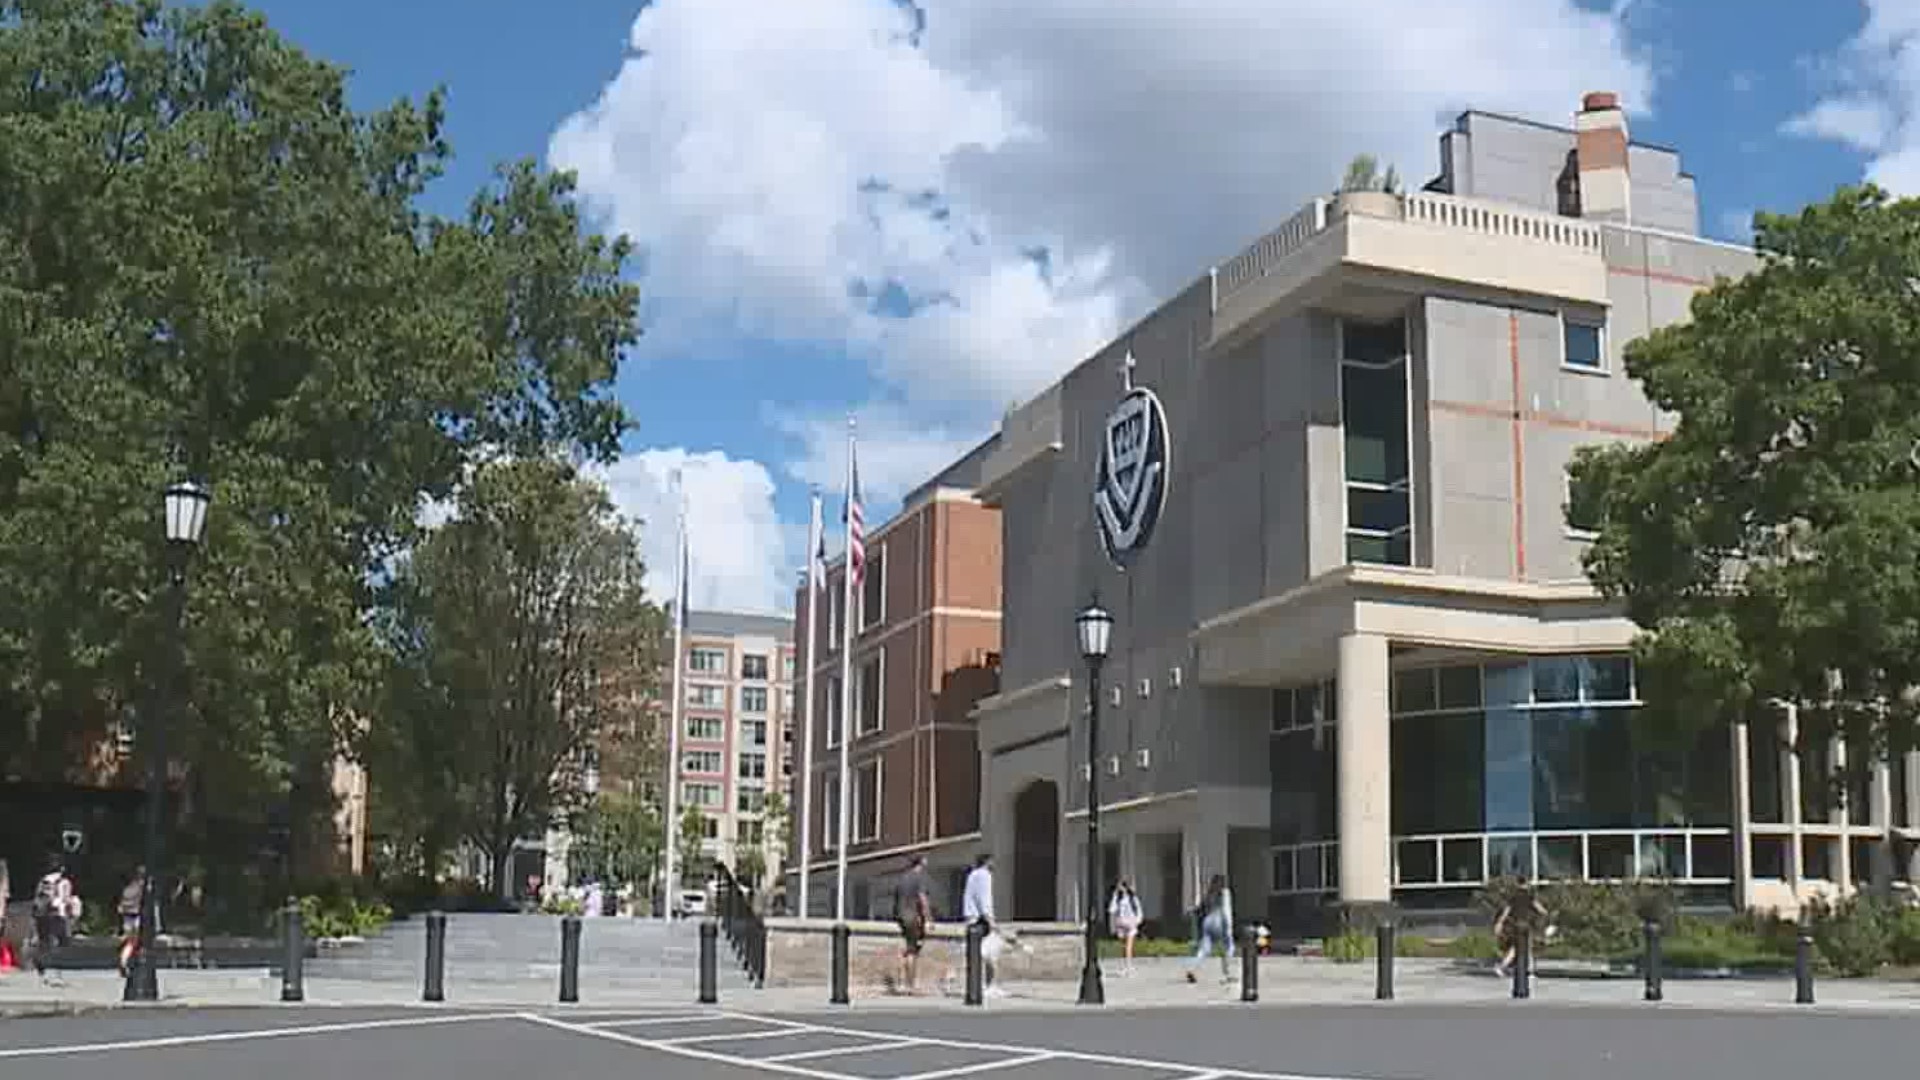 Five students at the University of Scranton have tested positive for coronavirus in the last week. They are all quarantining.